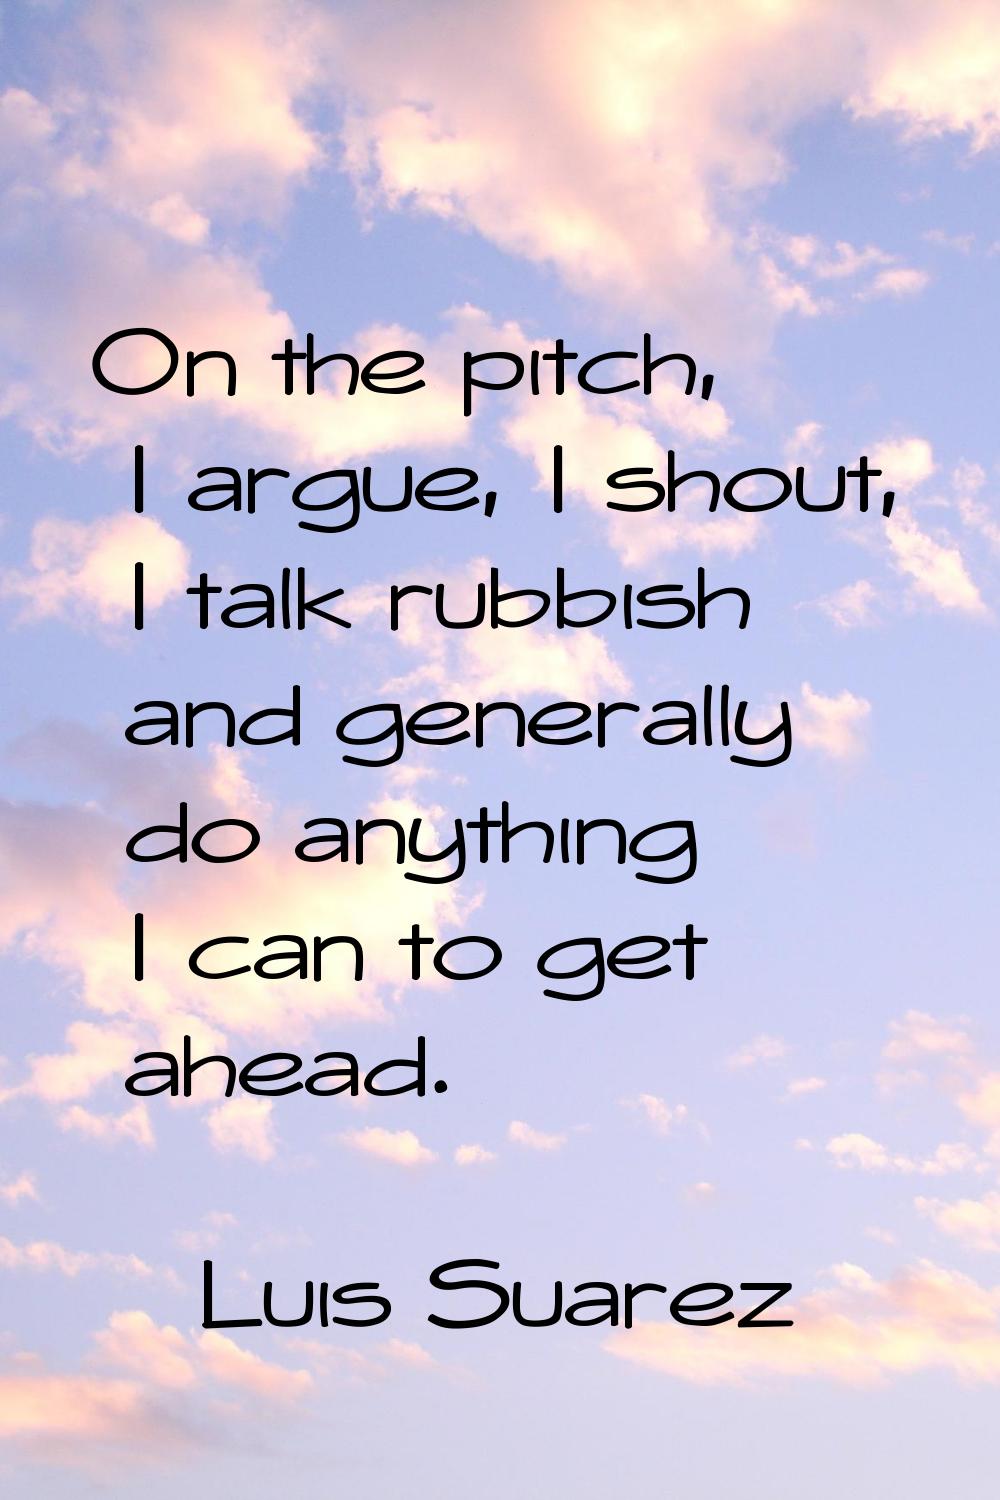 On the pitch, I argue, I shout, I talk rubbish and generally do anything I can to get ahead.